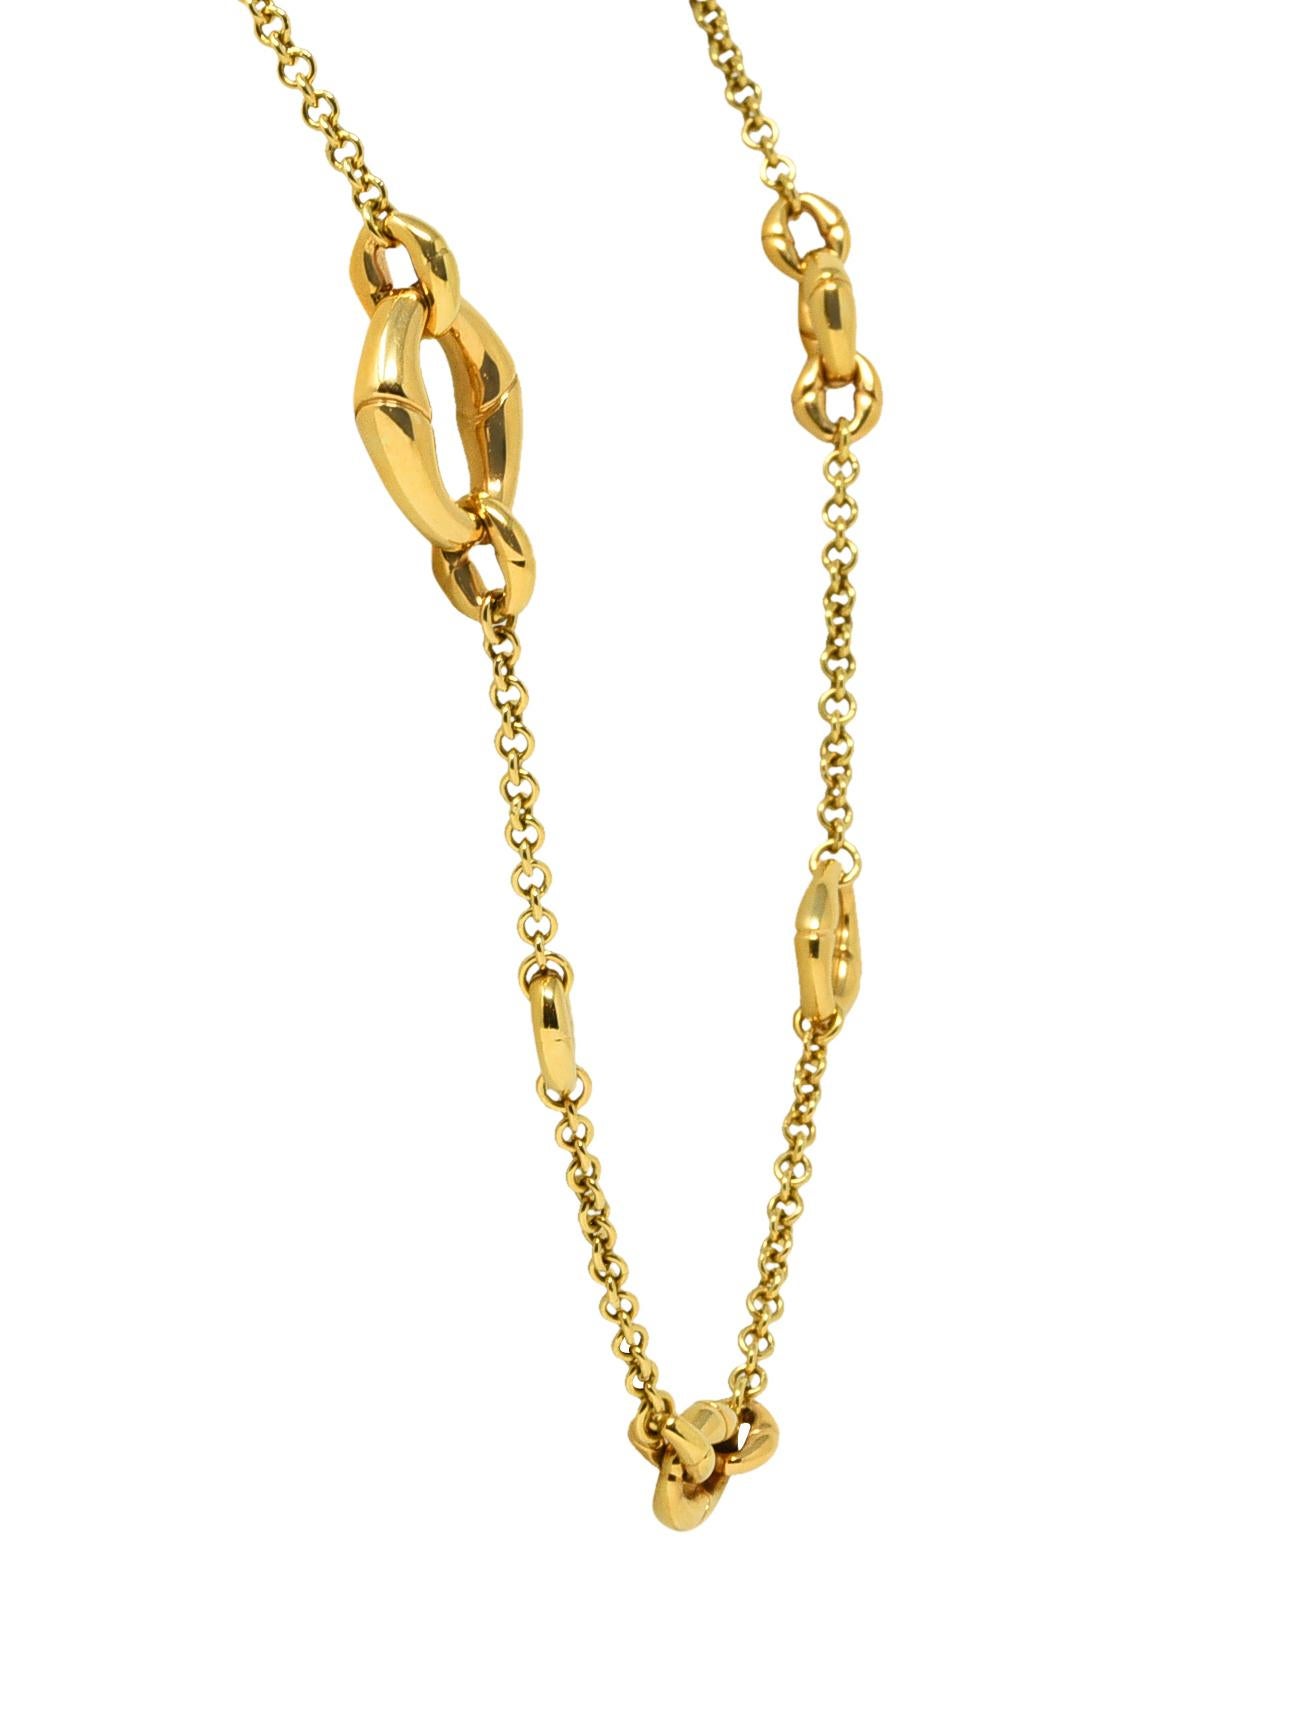 Contemporary Gucci 18 Karat Yellow Gold Bamboo Link Station Necklace